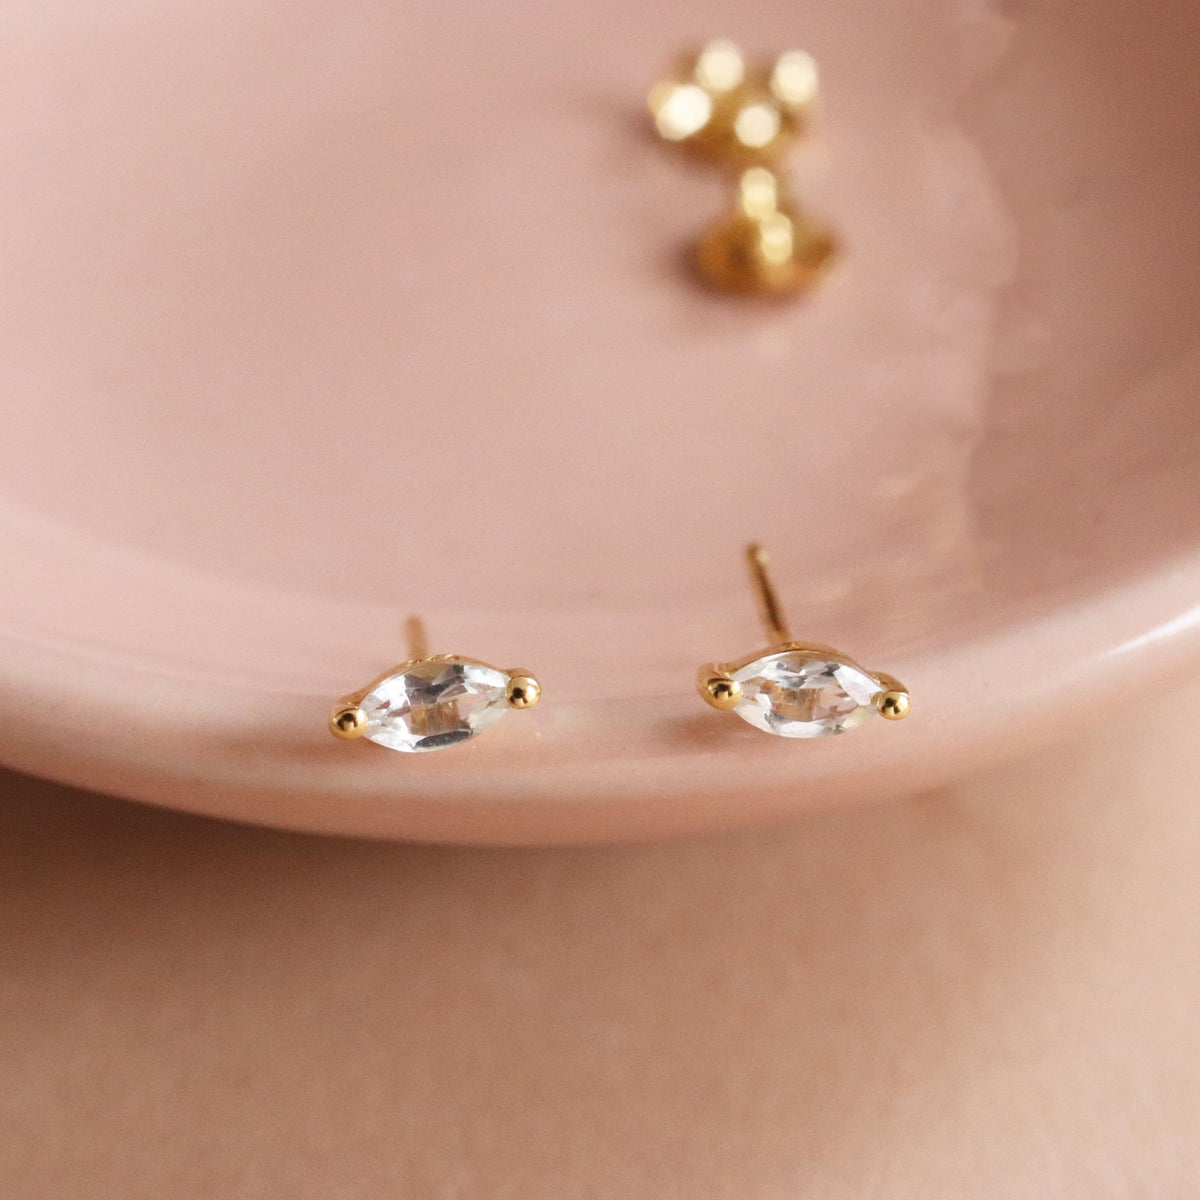 TINY LOVE MARQUIESE STUDS - WHITE TOPAZ &amp; GOLD - SO PRETTY CARA COTTER